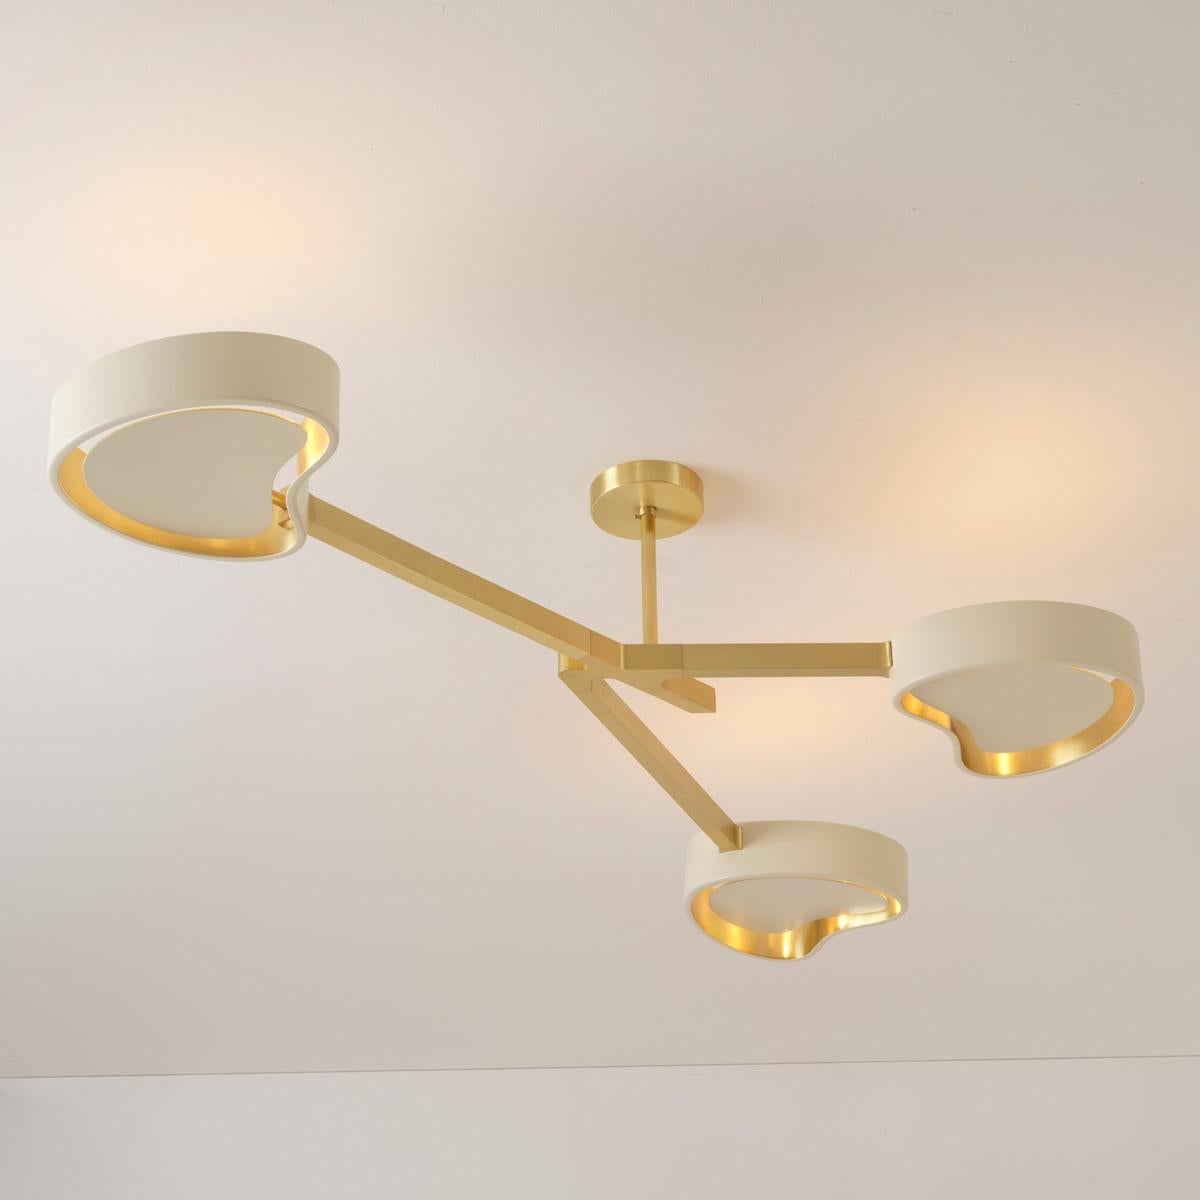 Brass Cuore N.3 Ceiling Light by Gaspare Asaro. Peltro and Bronze Finish For Sale